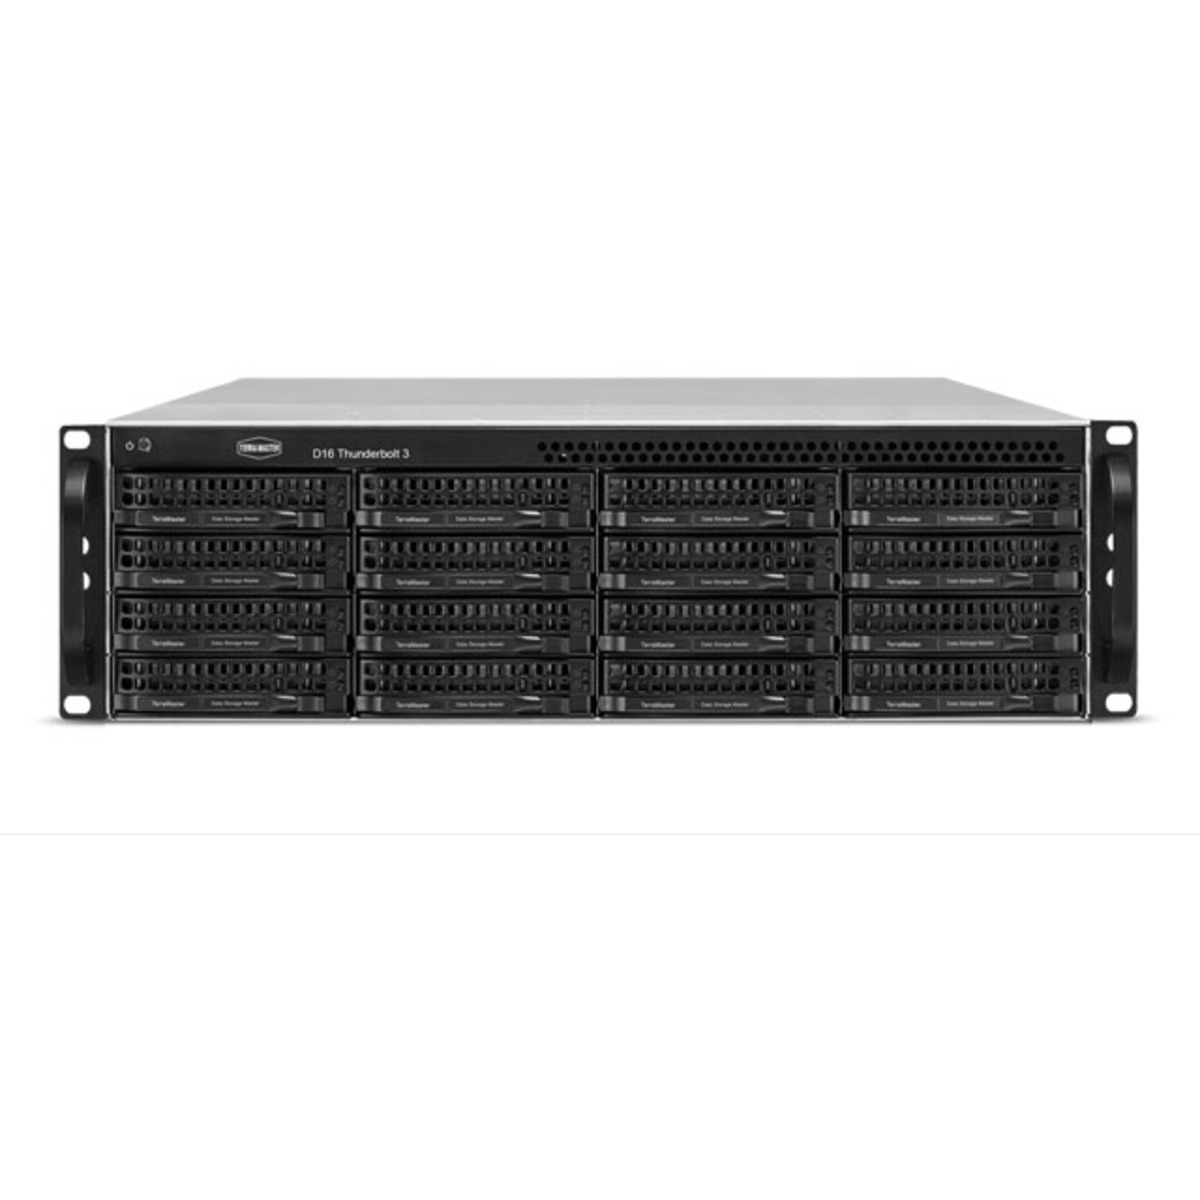 TerraMaster D16 Thunderbolt 3 22tb 16-Bay RackMount Multimedia / Power User / Business DAS - Direct Attached Storage Device 11x2tb Crucial MX500 CT2000MX500SSD1 2.5 560/510MB/s SATA 6Gb/s SSD CONSUMER Class Drives Installed - Burn-In Tested D16 Thunderbolt 3